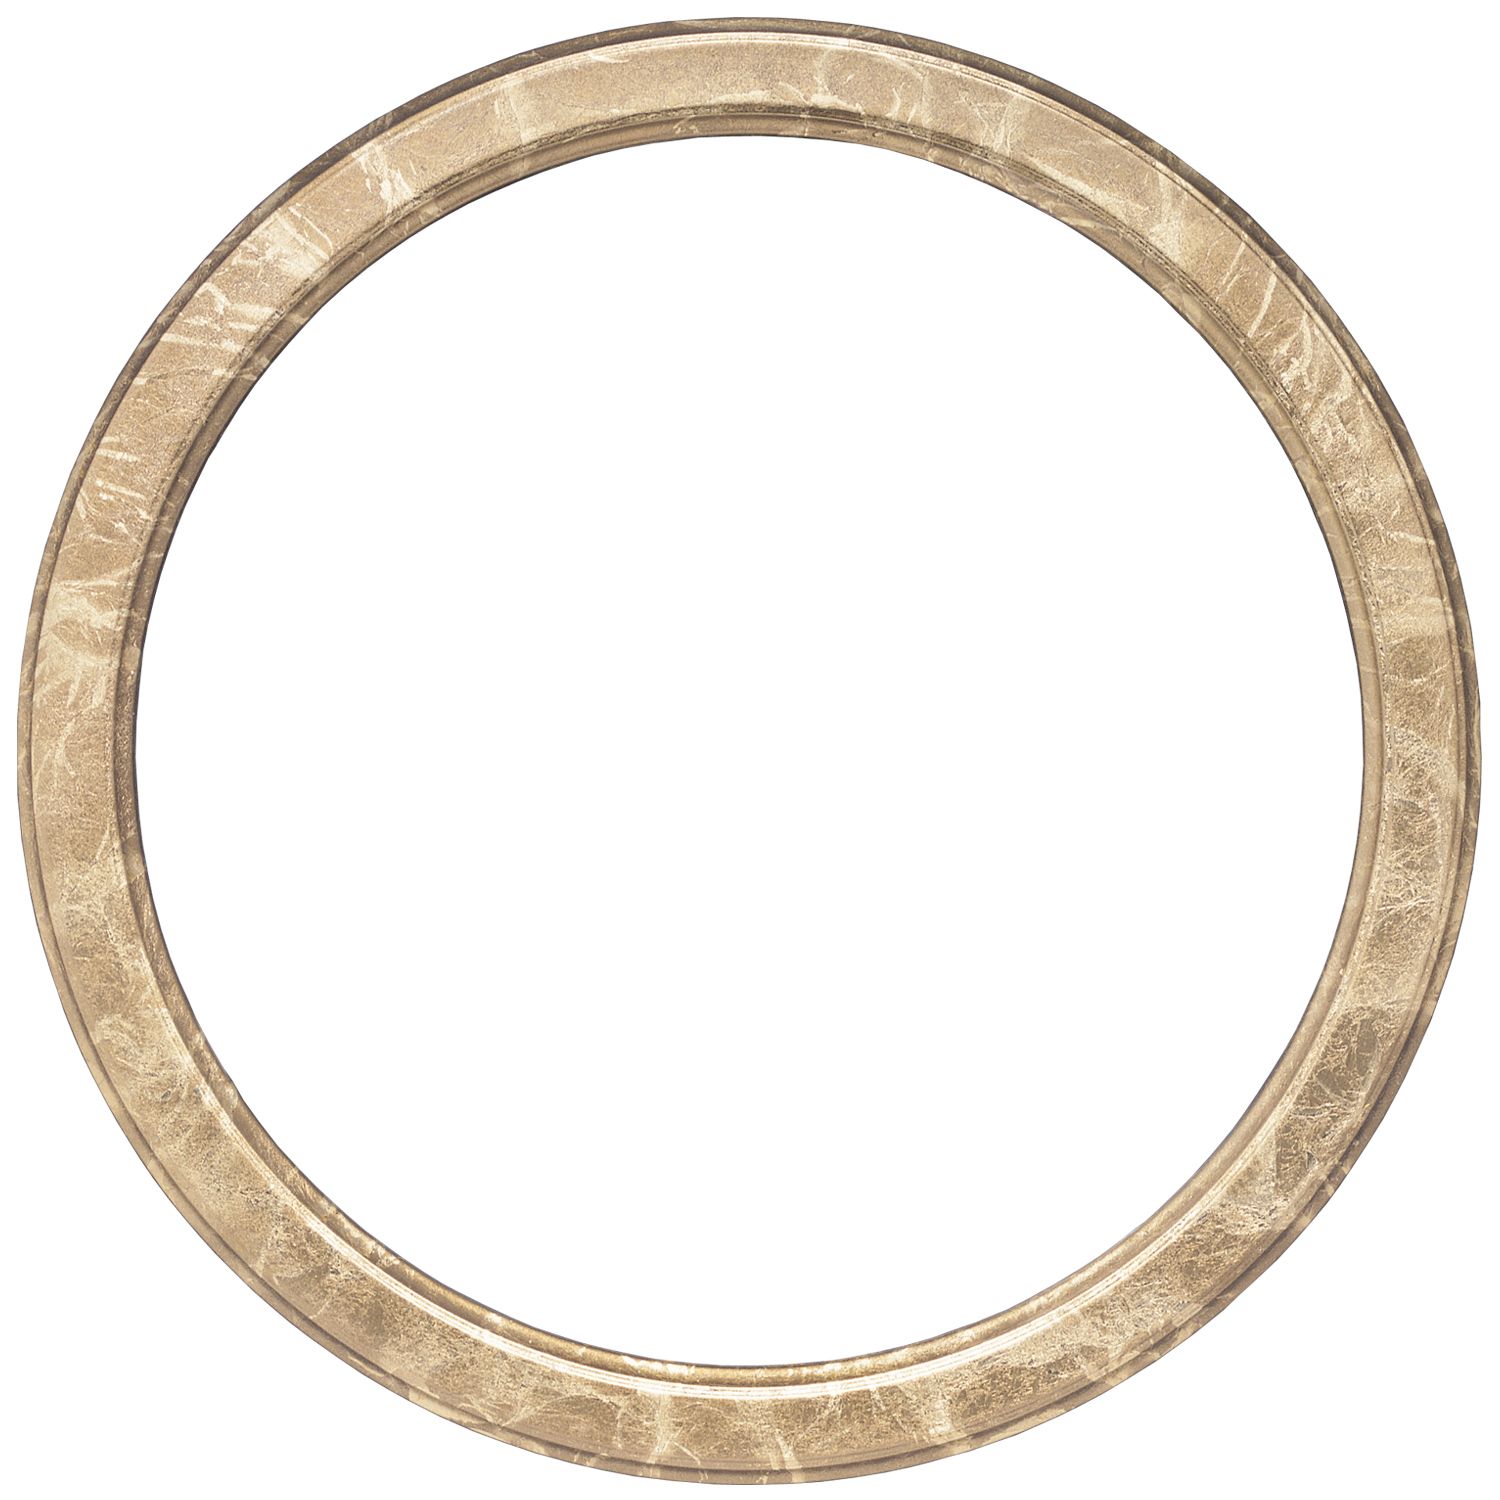  ArtToFrames 24 x 24 Inch 462 Circle Frame Gold Leaf Picture  Frame Comes with Circle Acrylic Std, Circle Frame Back and Wall Hanging  Hardware (462C2424GL): Posters & Prints